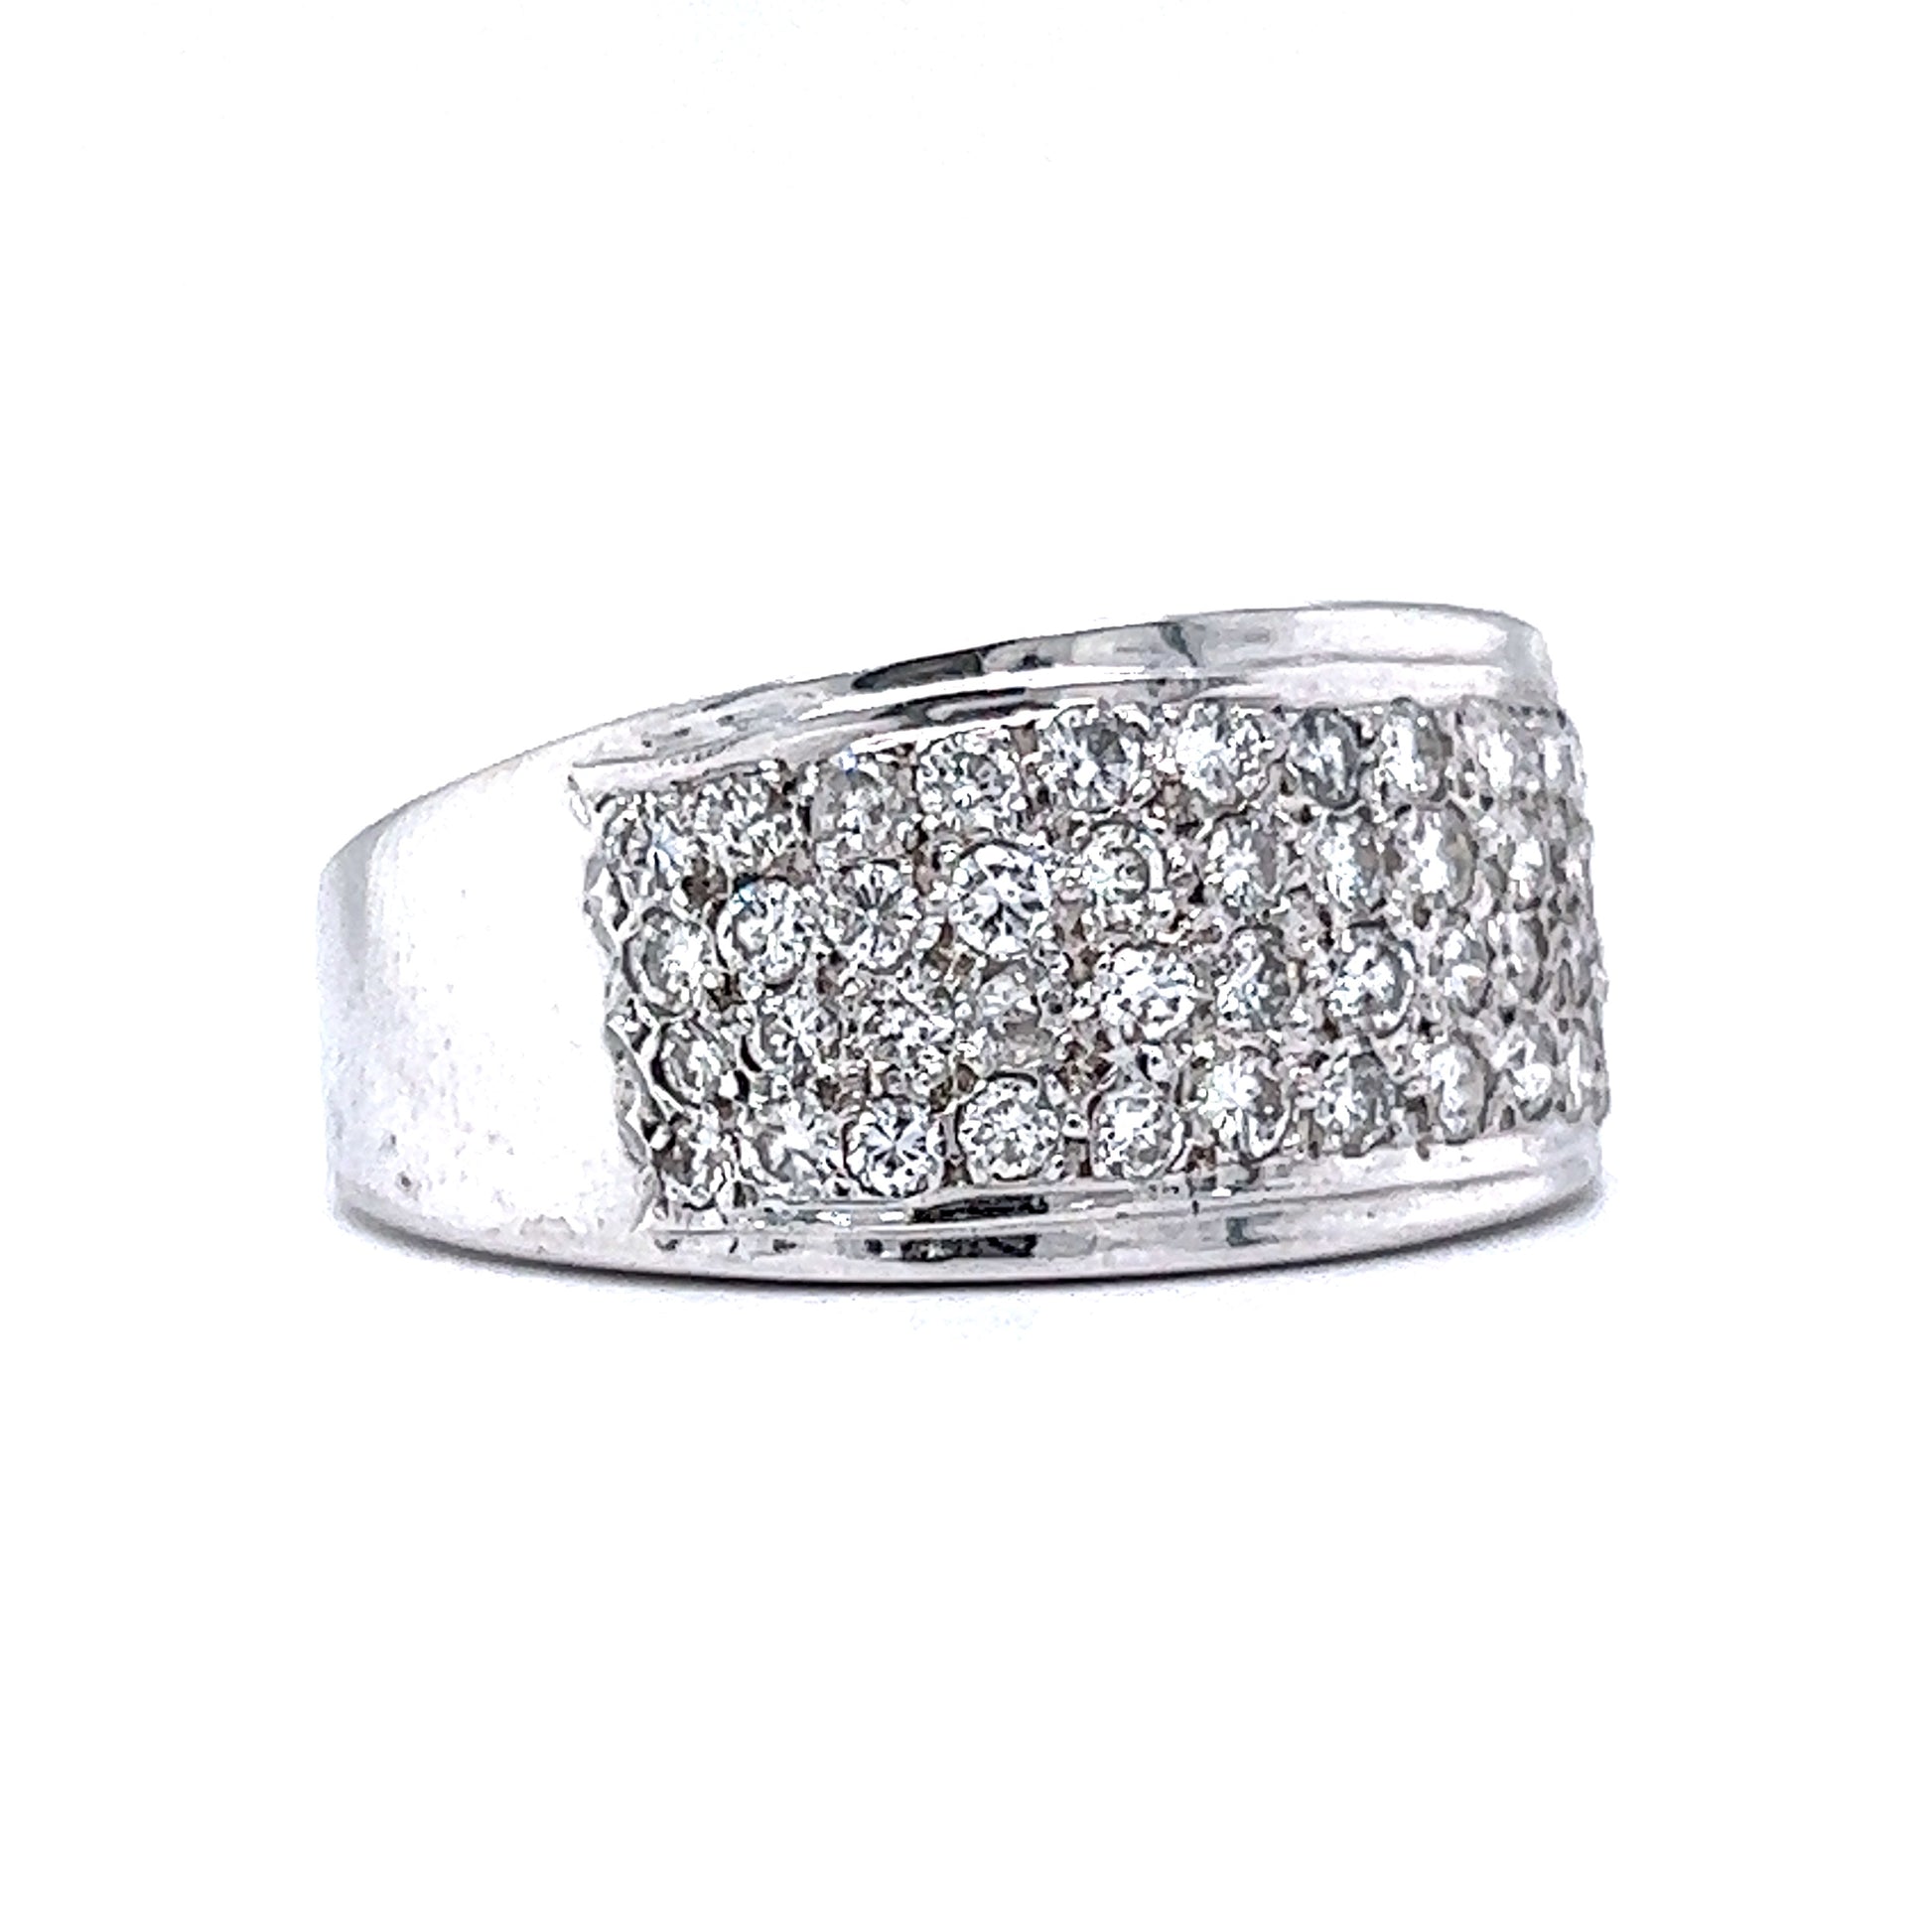 1.32 Pave Diamond Cocktail Ring in 14k White Gold